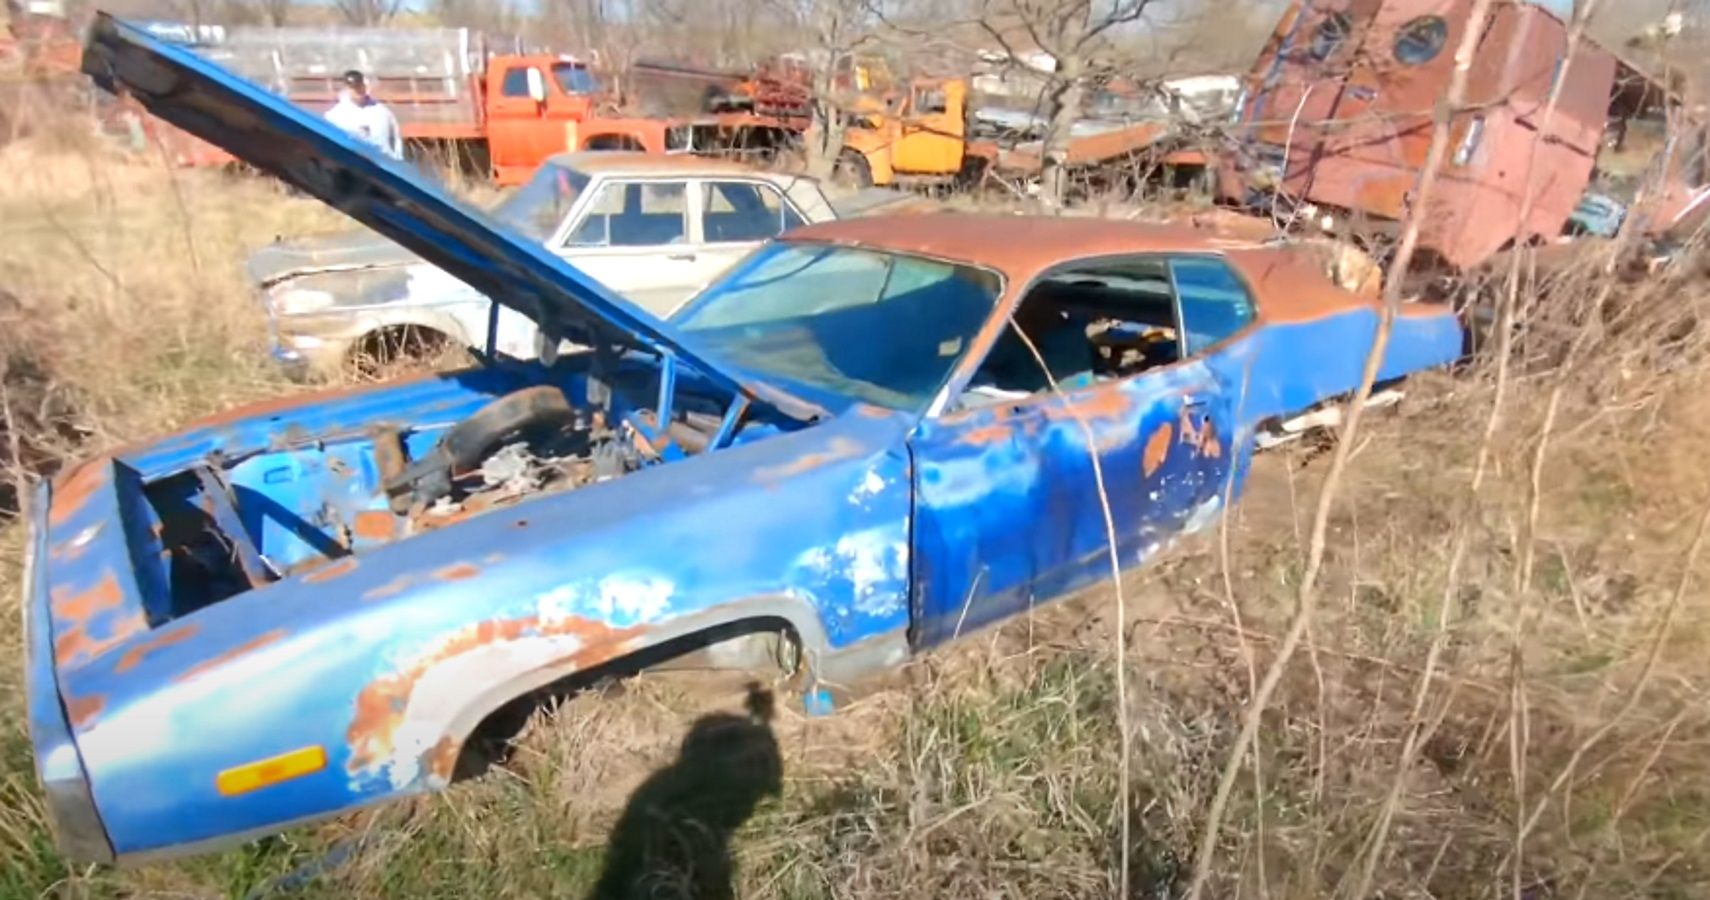 This Classic Car Graveyard Is Full Of Automotive Skeletons